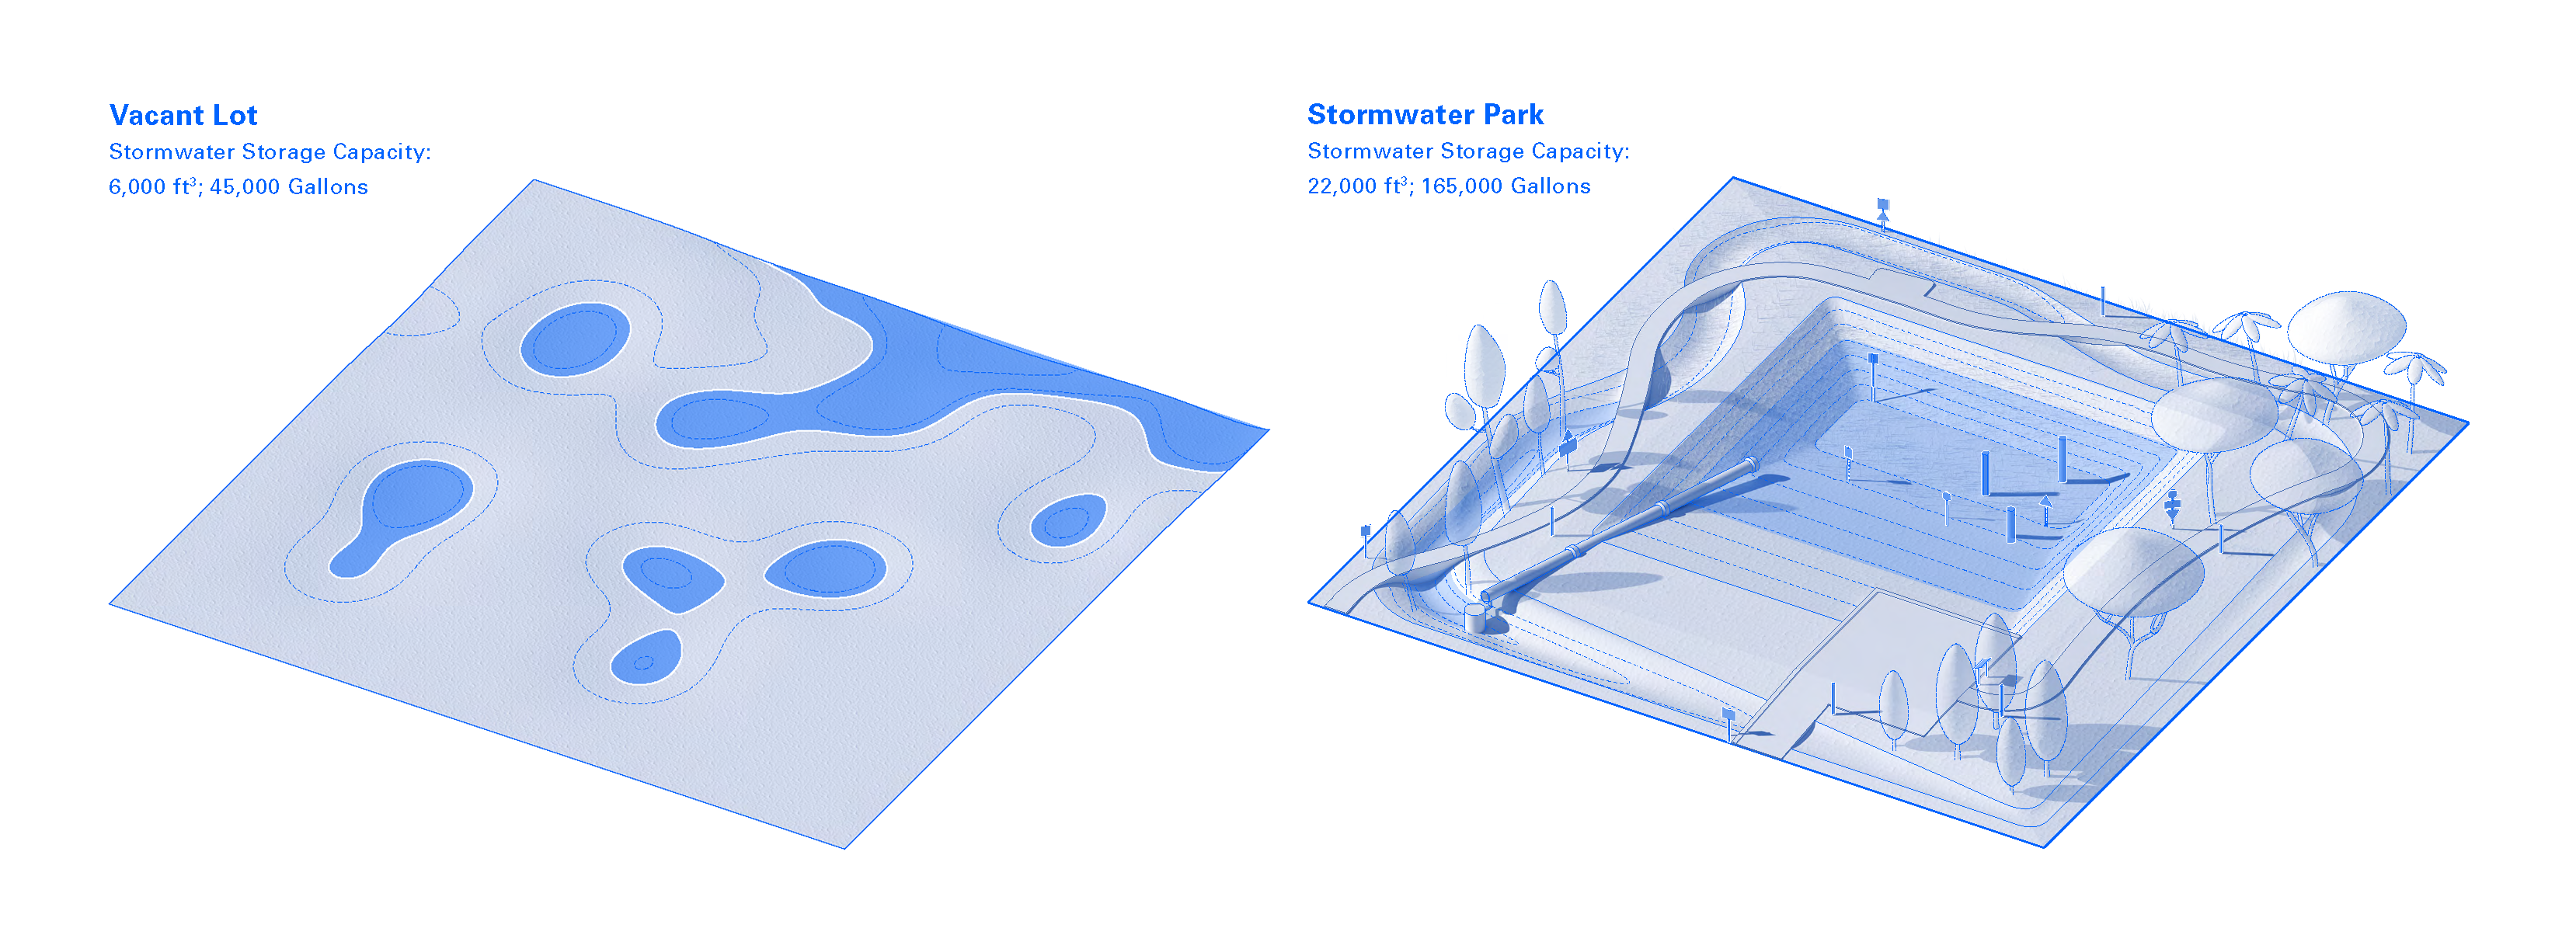 Stormwater Park